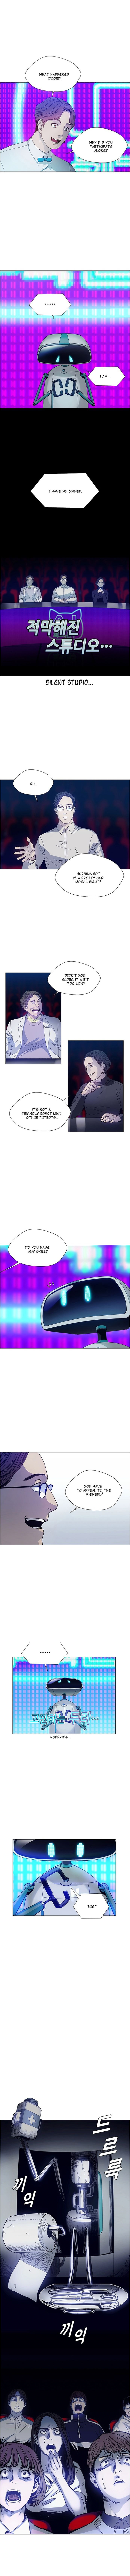 If AI Ruled the World Chapter 3 - Page 4